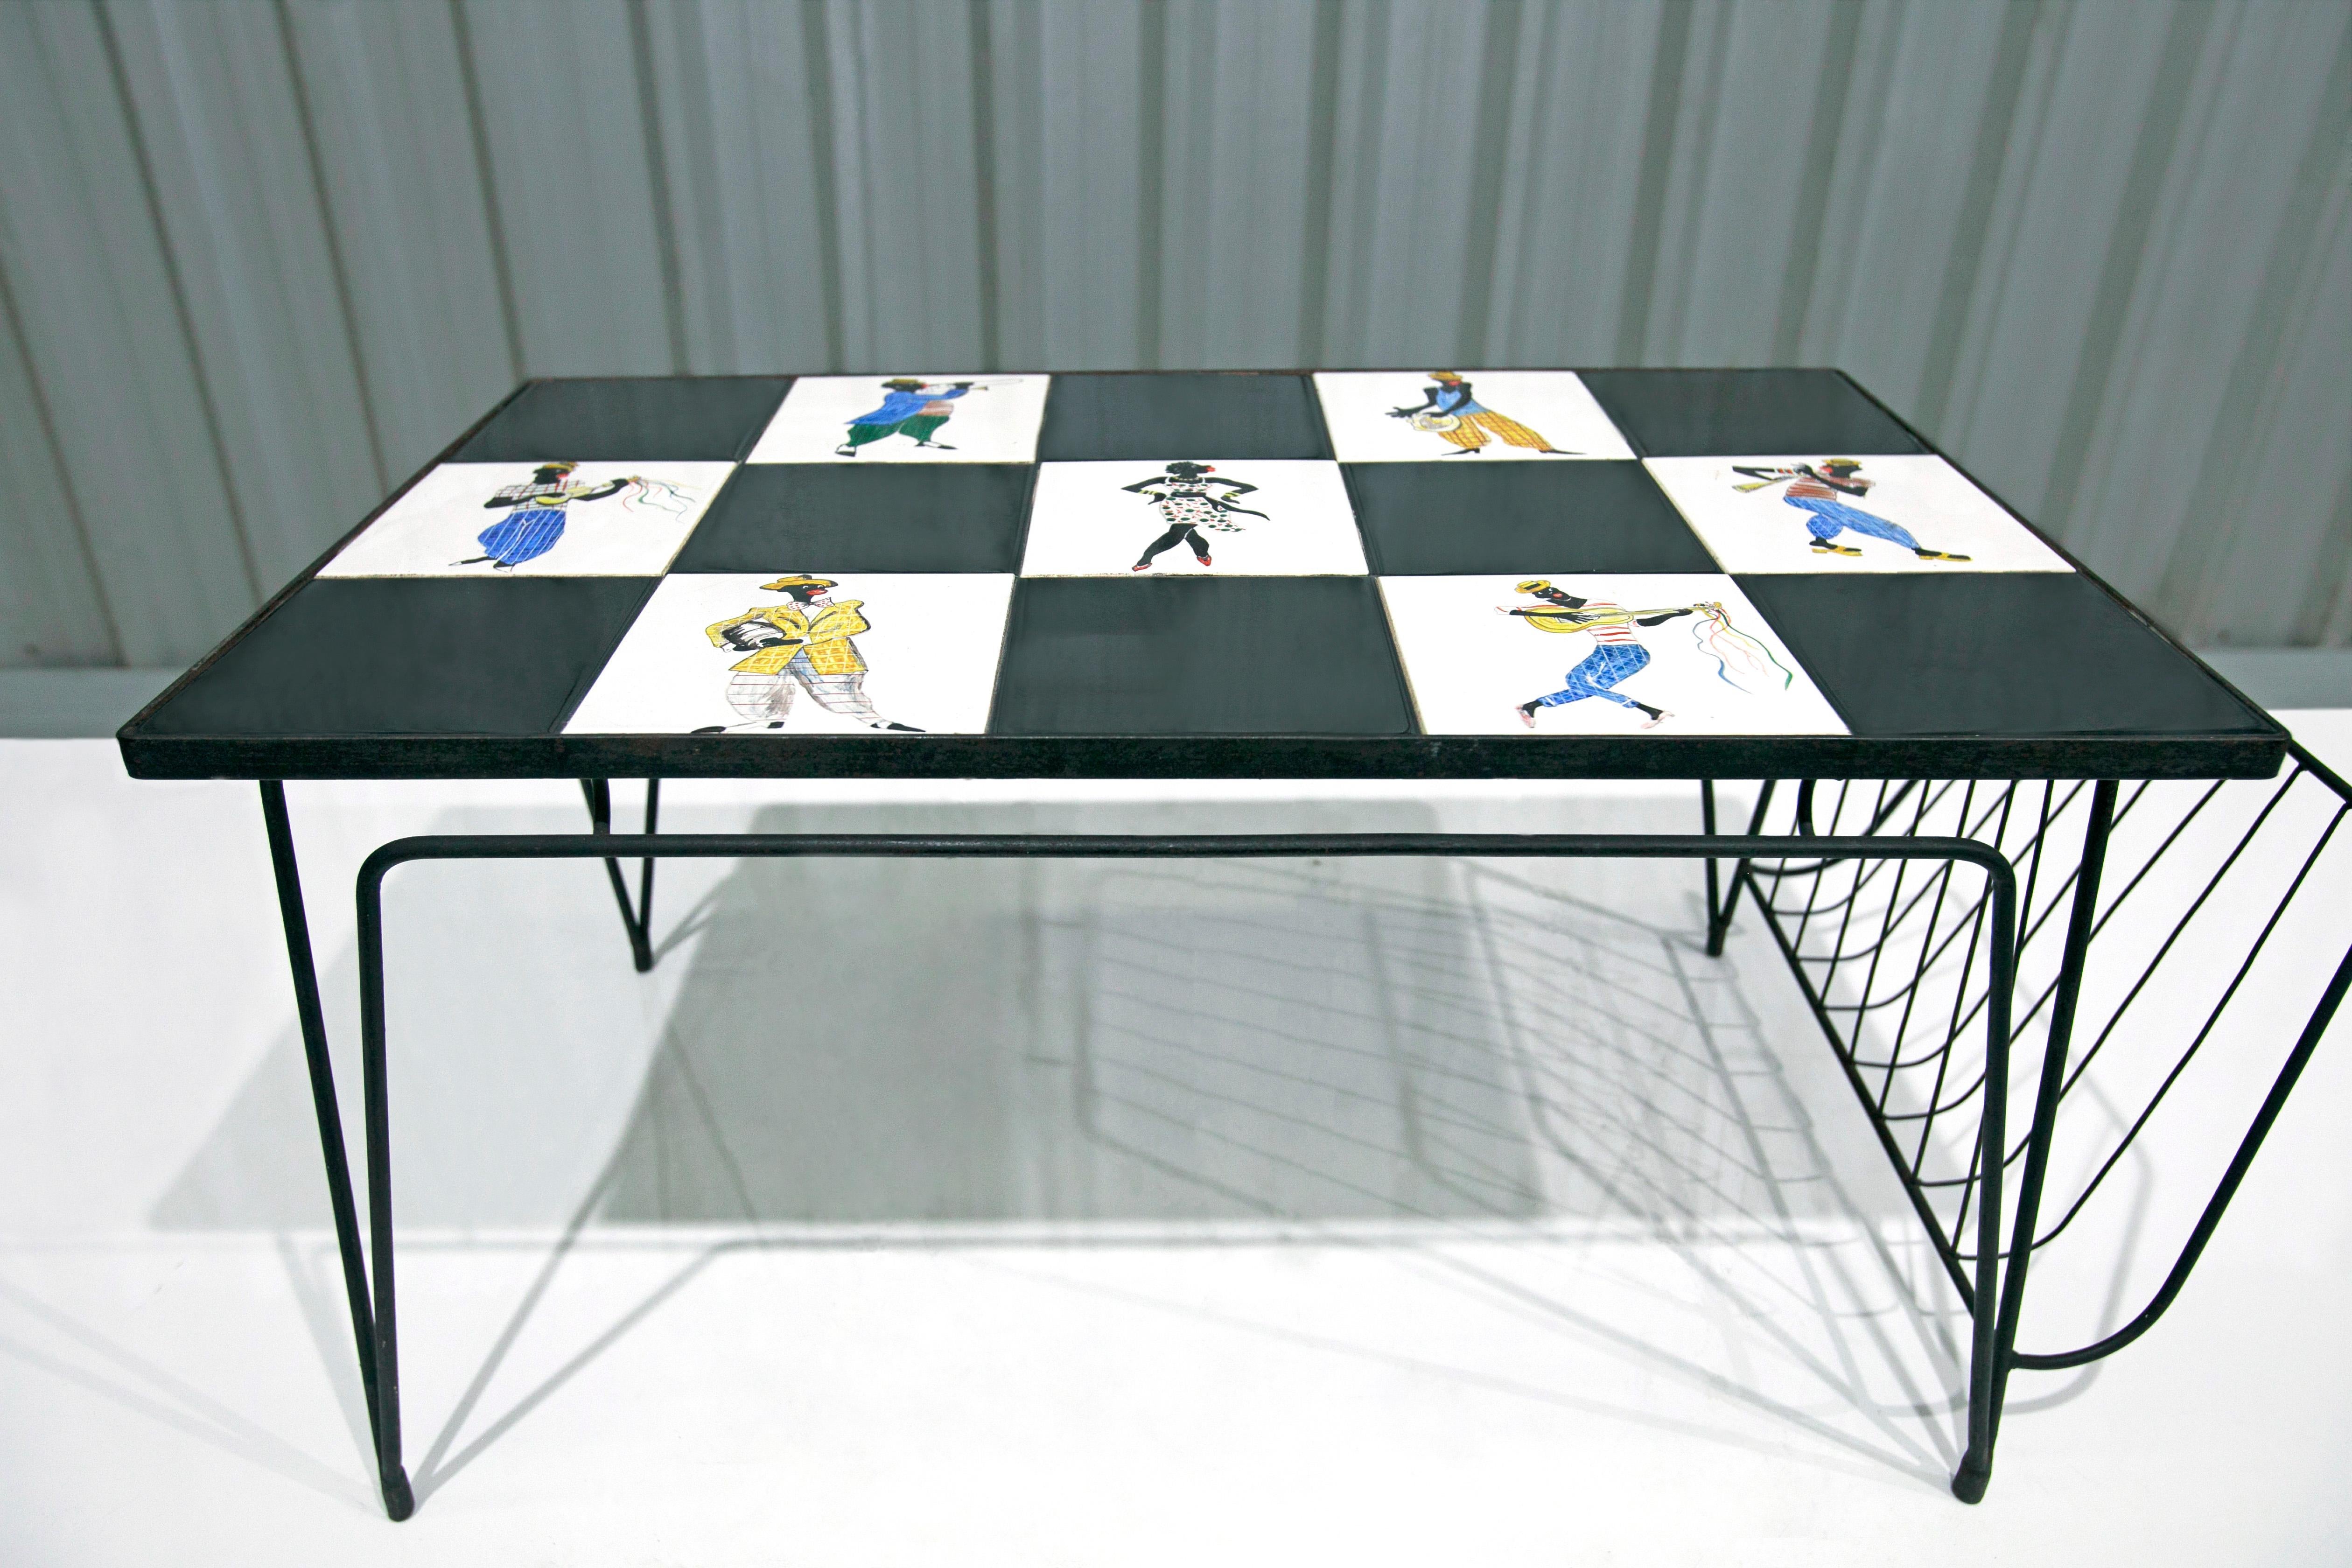 Available in NYC today with domestic free shipping included, this Brazilian Modern Checkered Coffee Table in Metal & Tile with Illustration made in the 50's is gorgeous!

This coffee table is made with black metal and features thin legs and a